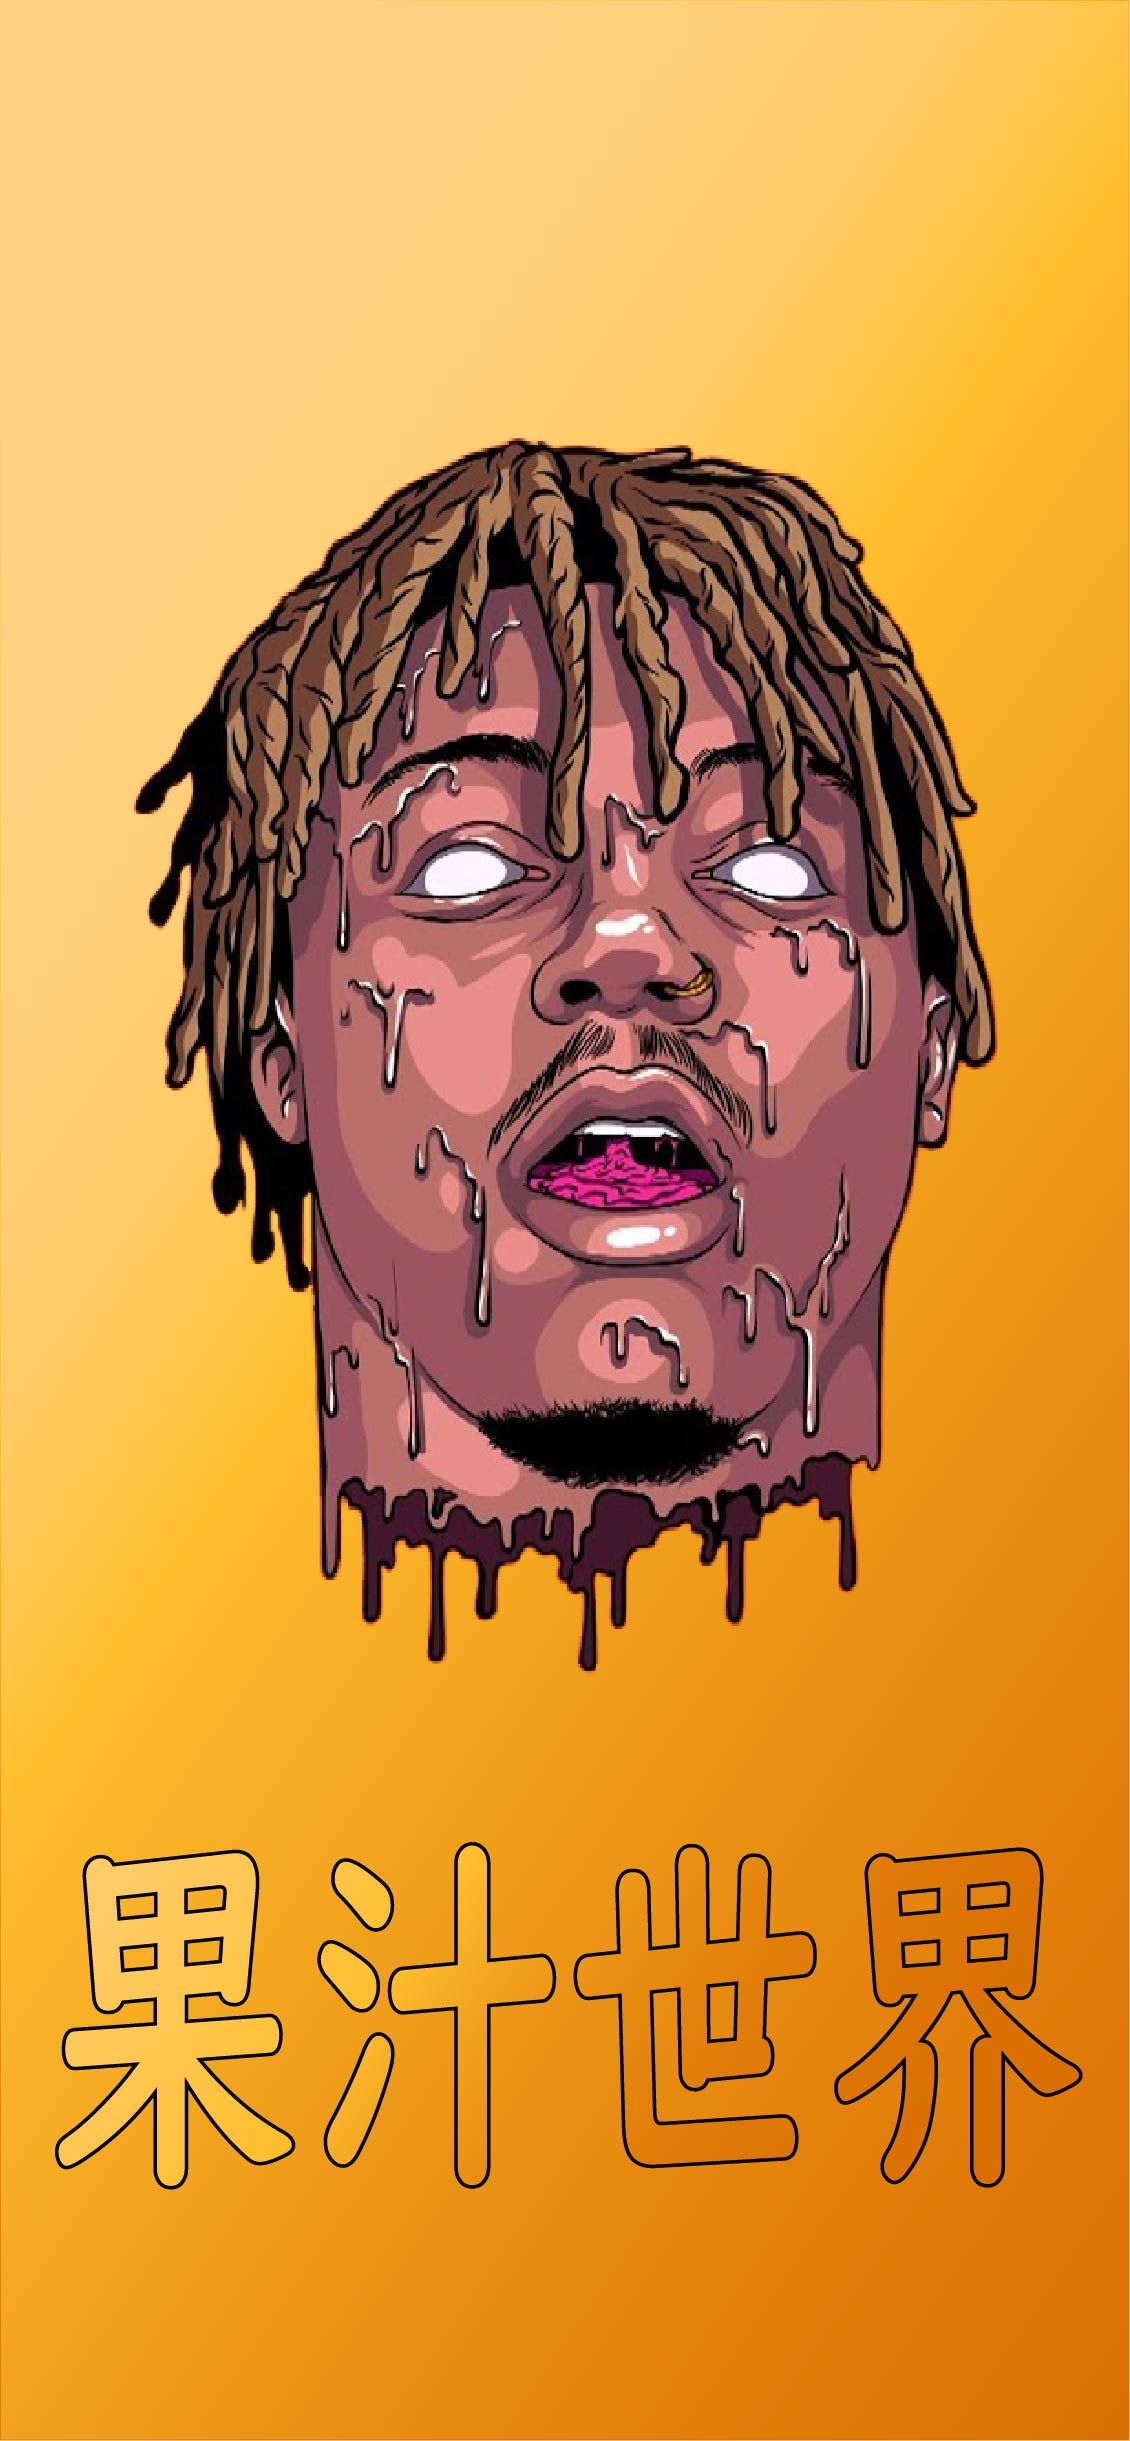 Anime Juice Wrld Ps4 Wallpapers - Wallpaper Cave